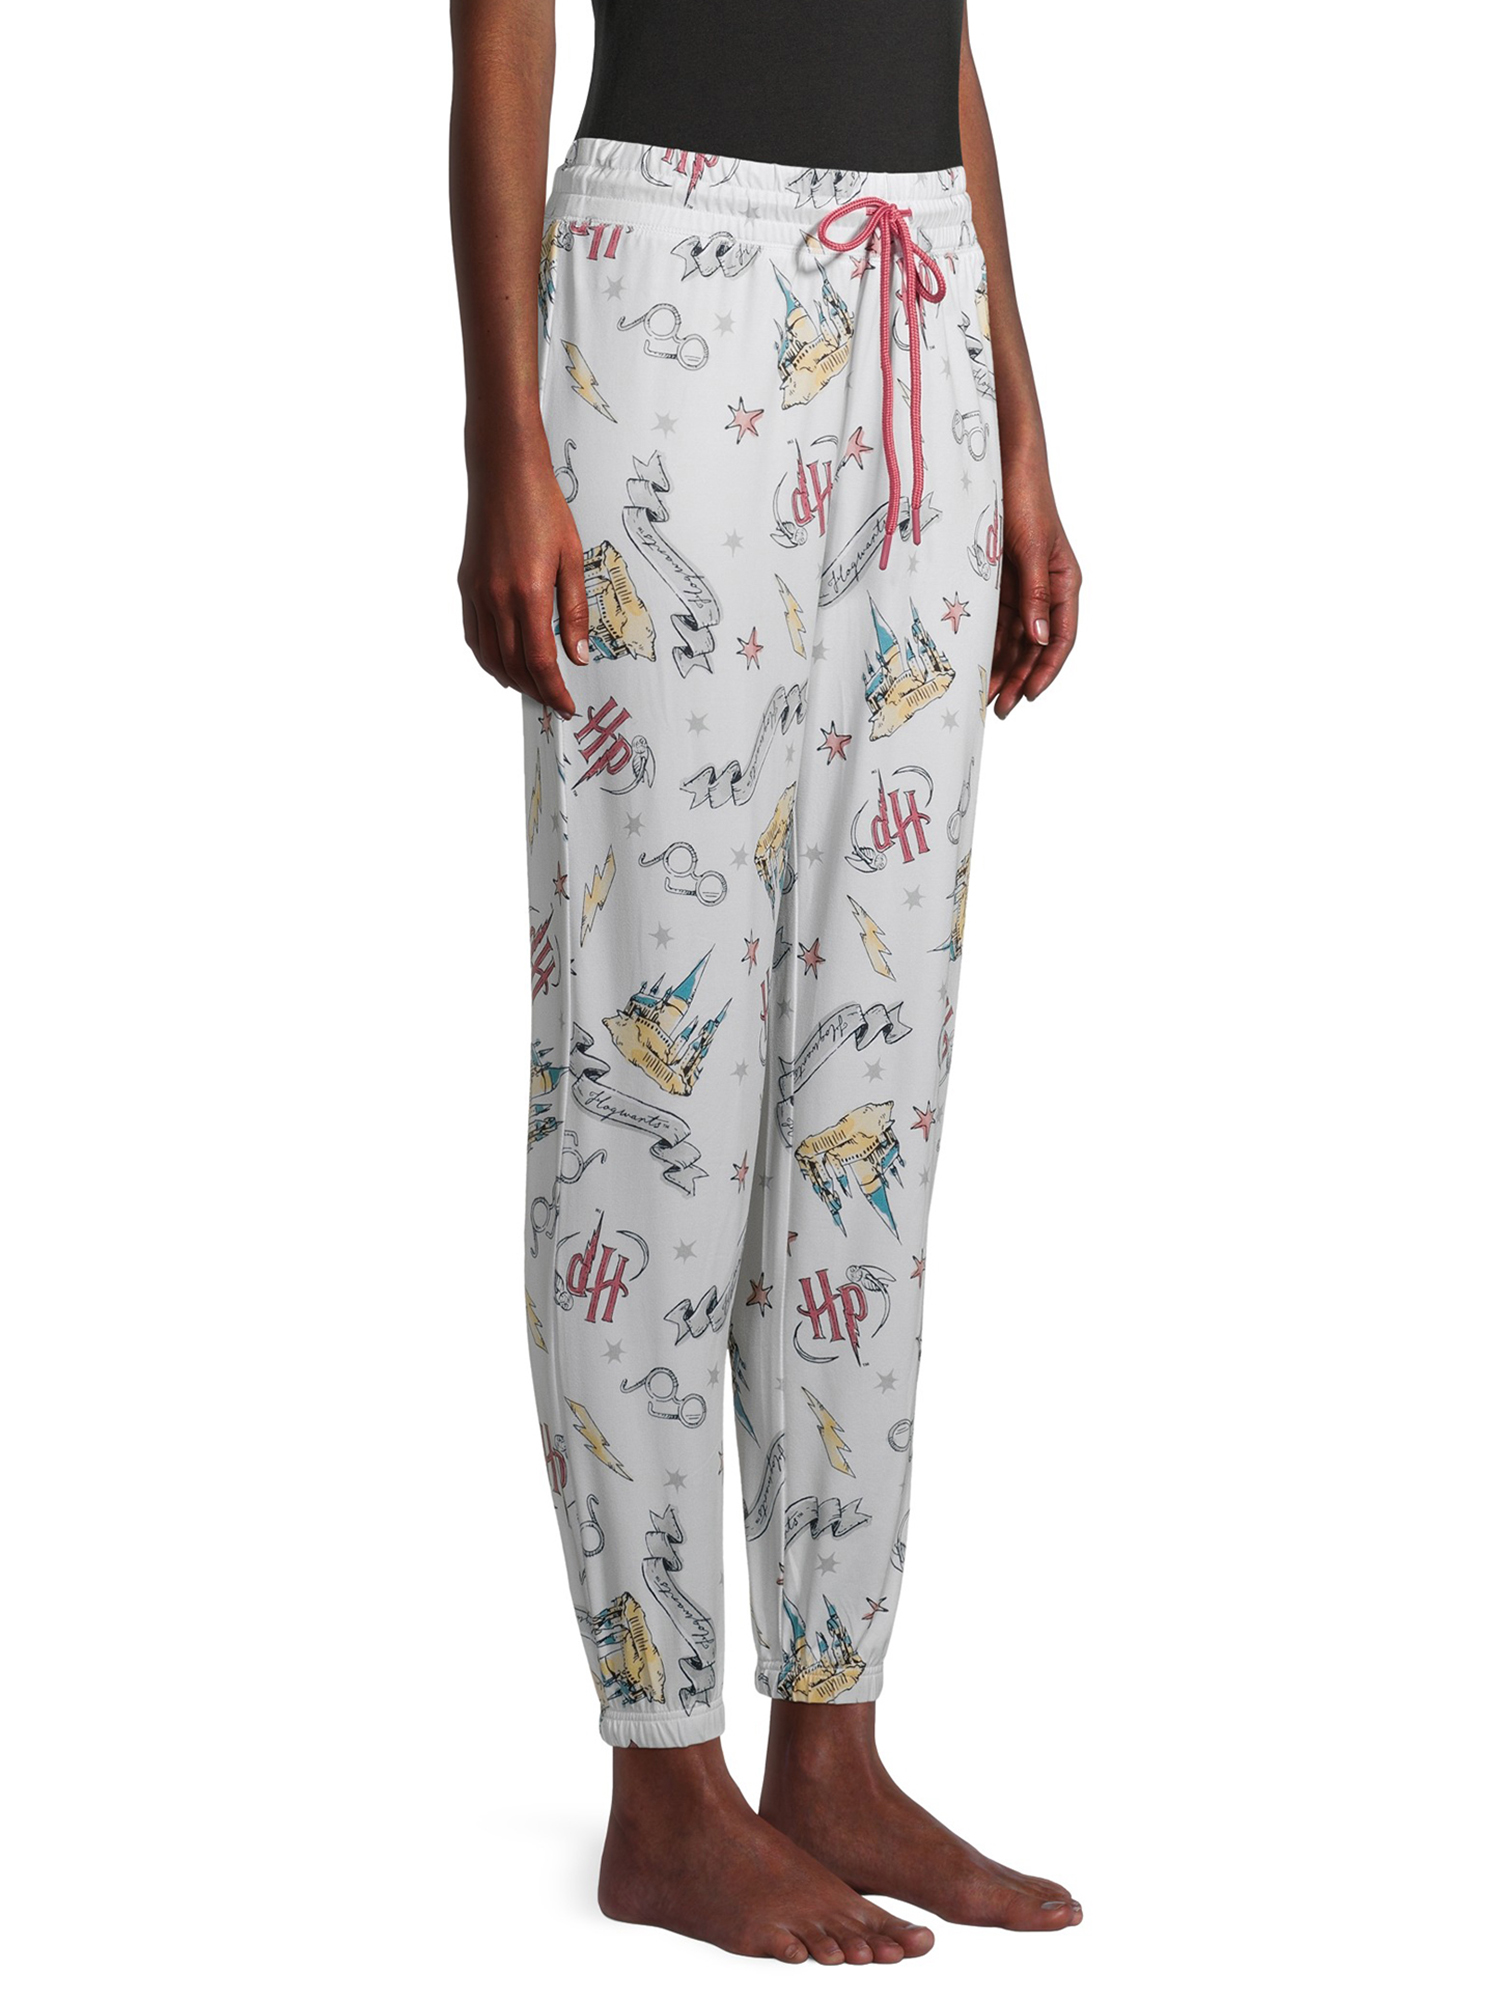 Womens and Women's Jogger Pant - Harry Potter - image 5 of 6